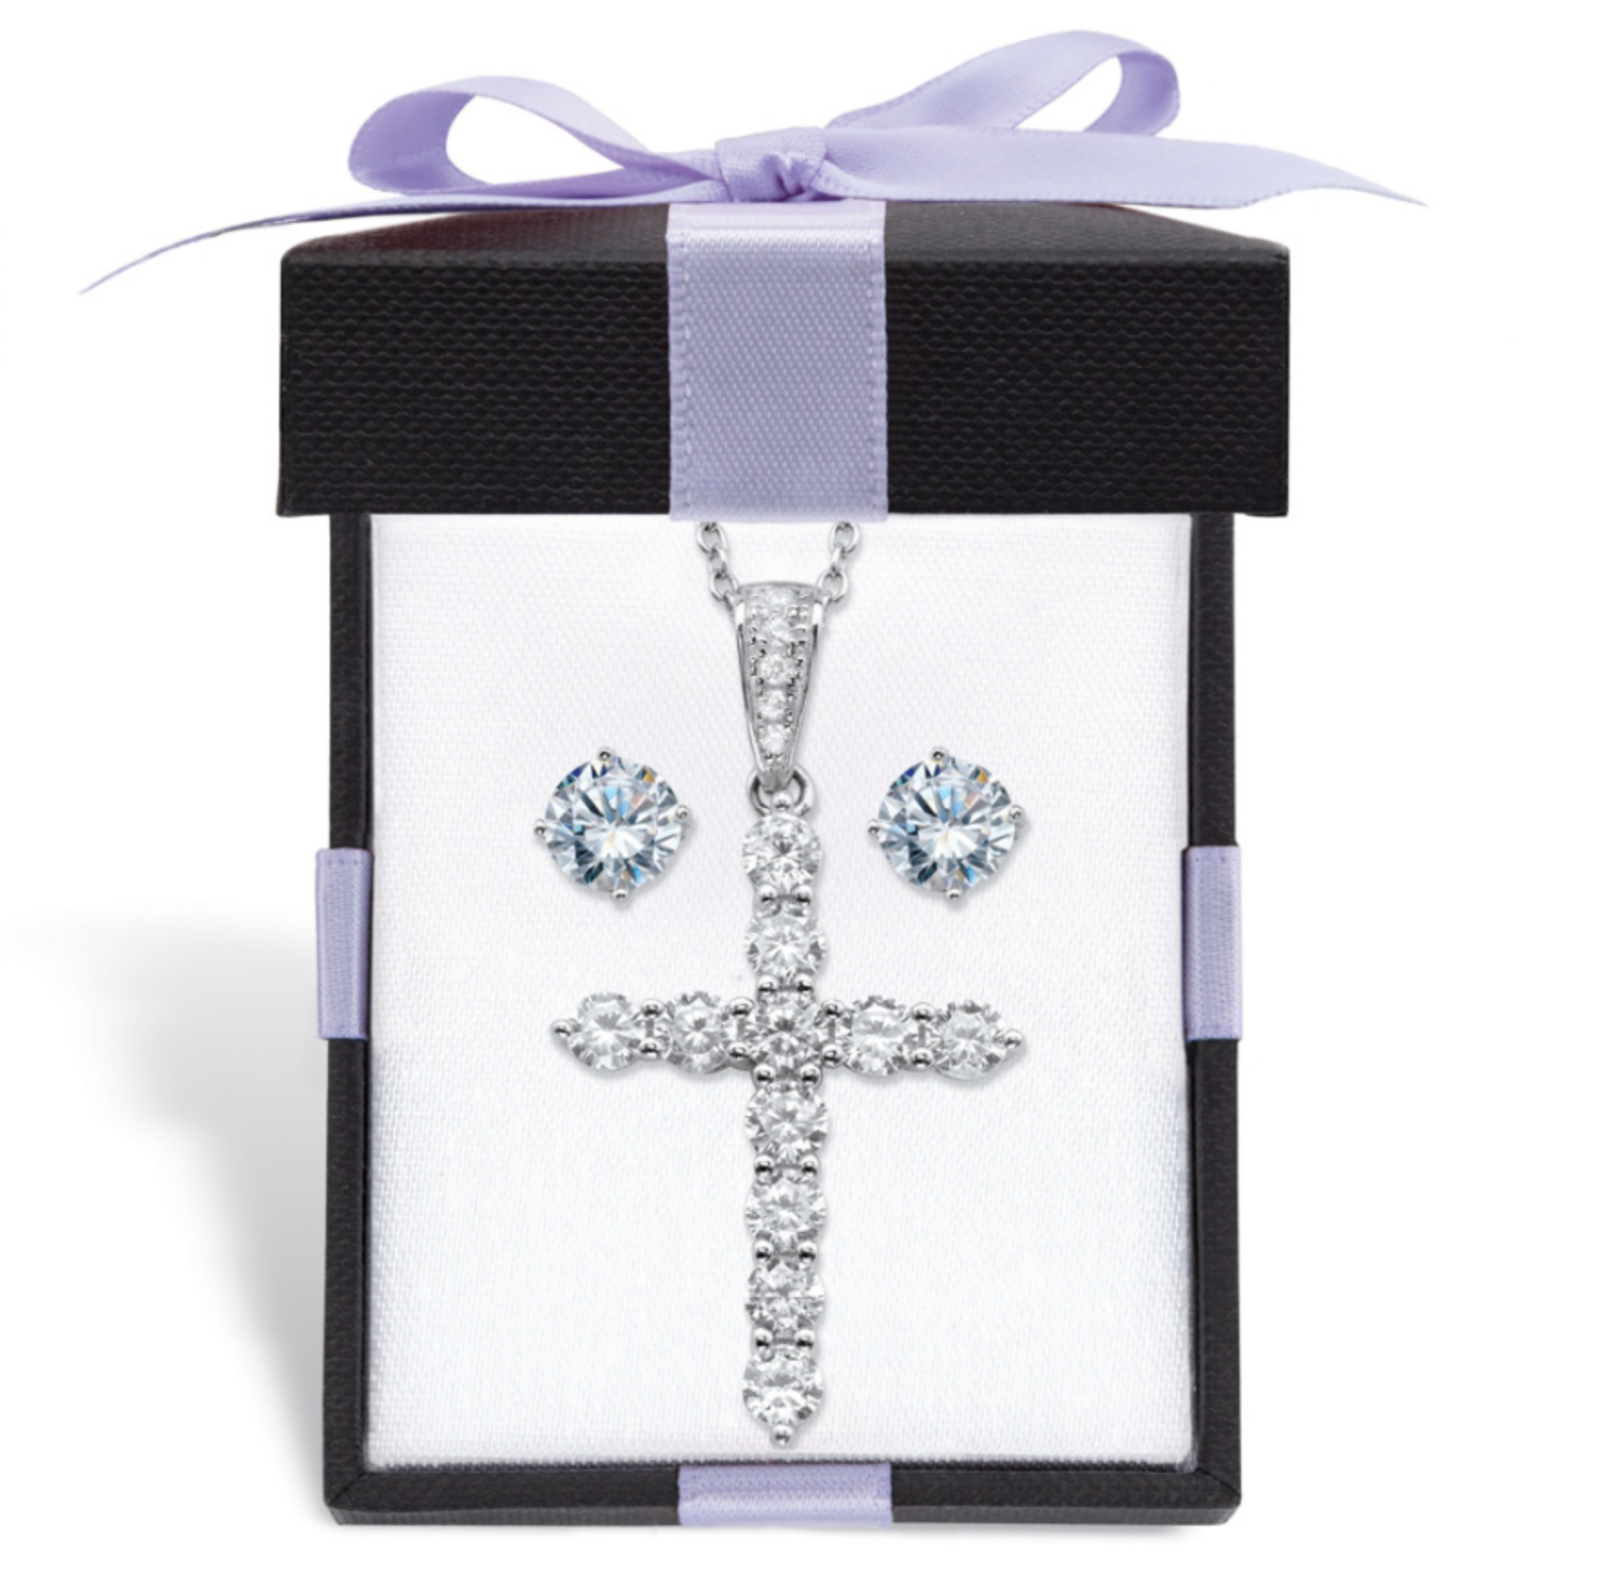 Primary image for ROUND CZ STUD EARRINGS CROSS NECKLACE SET STERLING SILVER WITH GIFT BOX